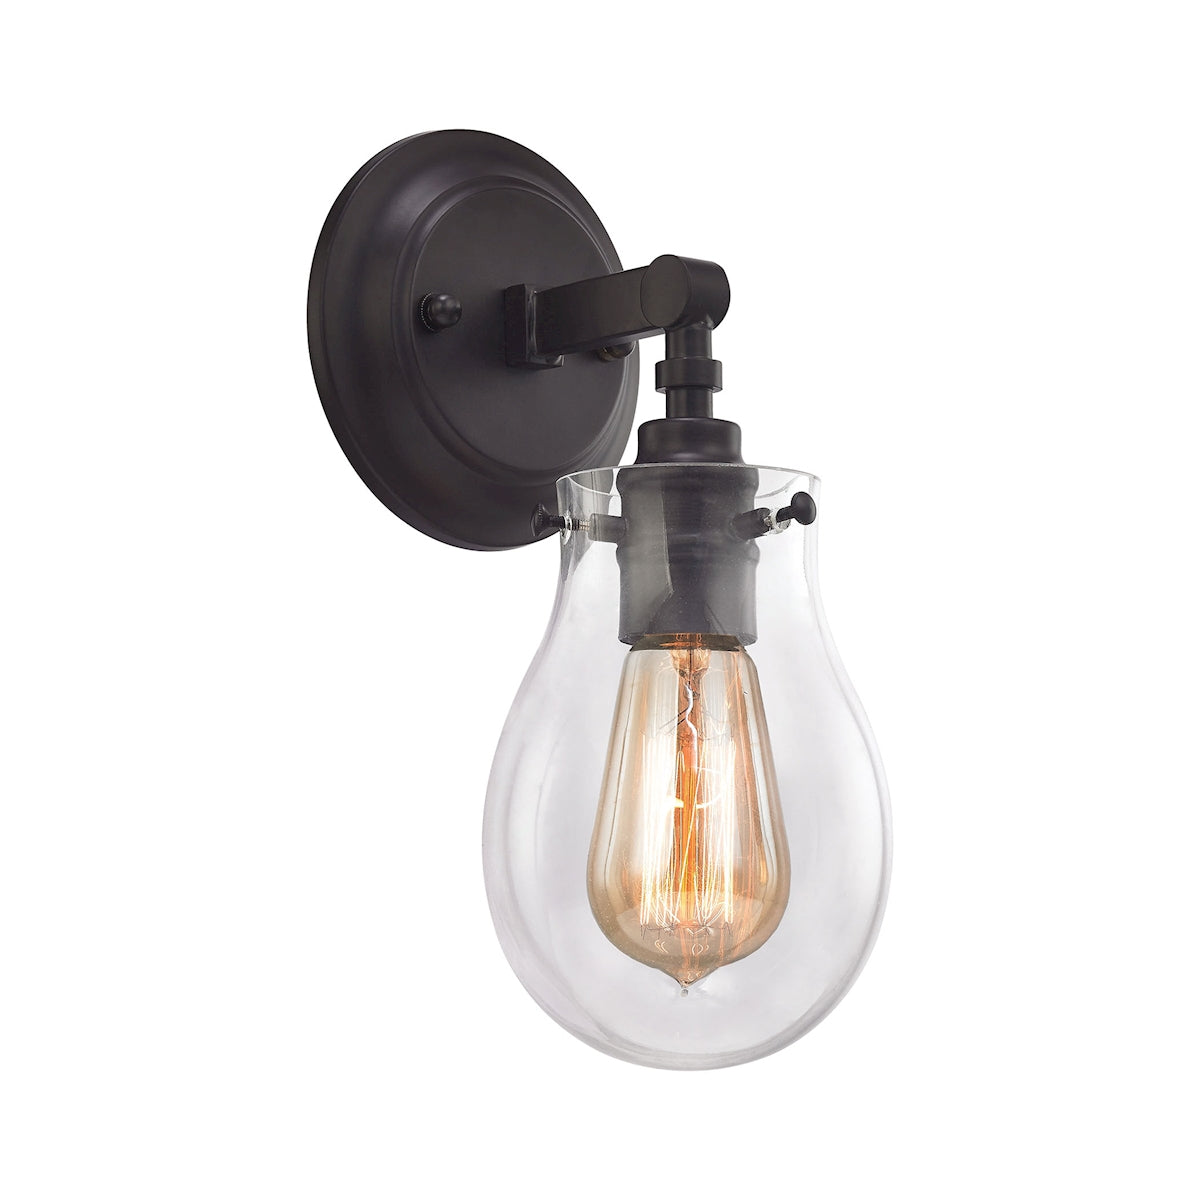 ELK Lighting 31930/1 Jaelyn 1-Light Vanity Lamp in Oil Rubbed Bronze with Clear Glass